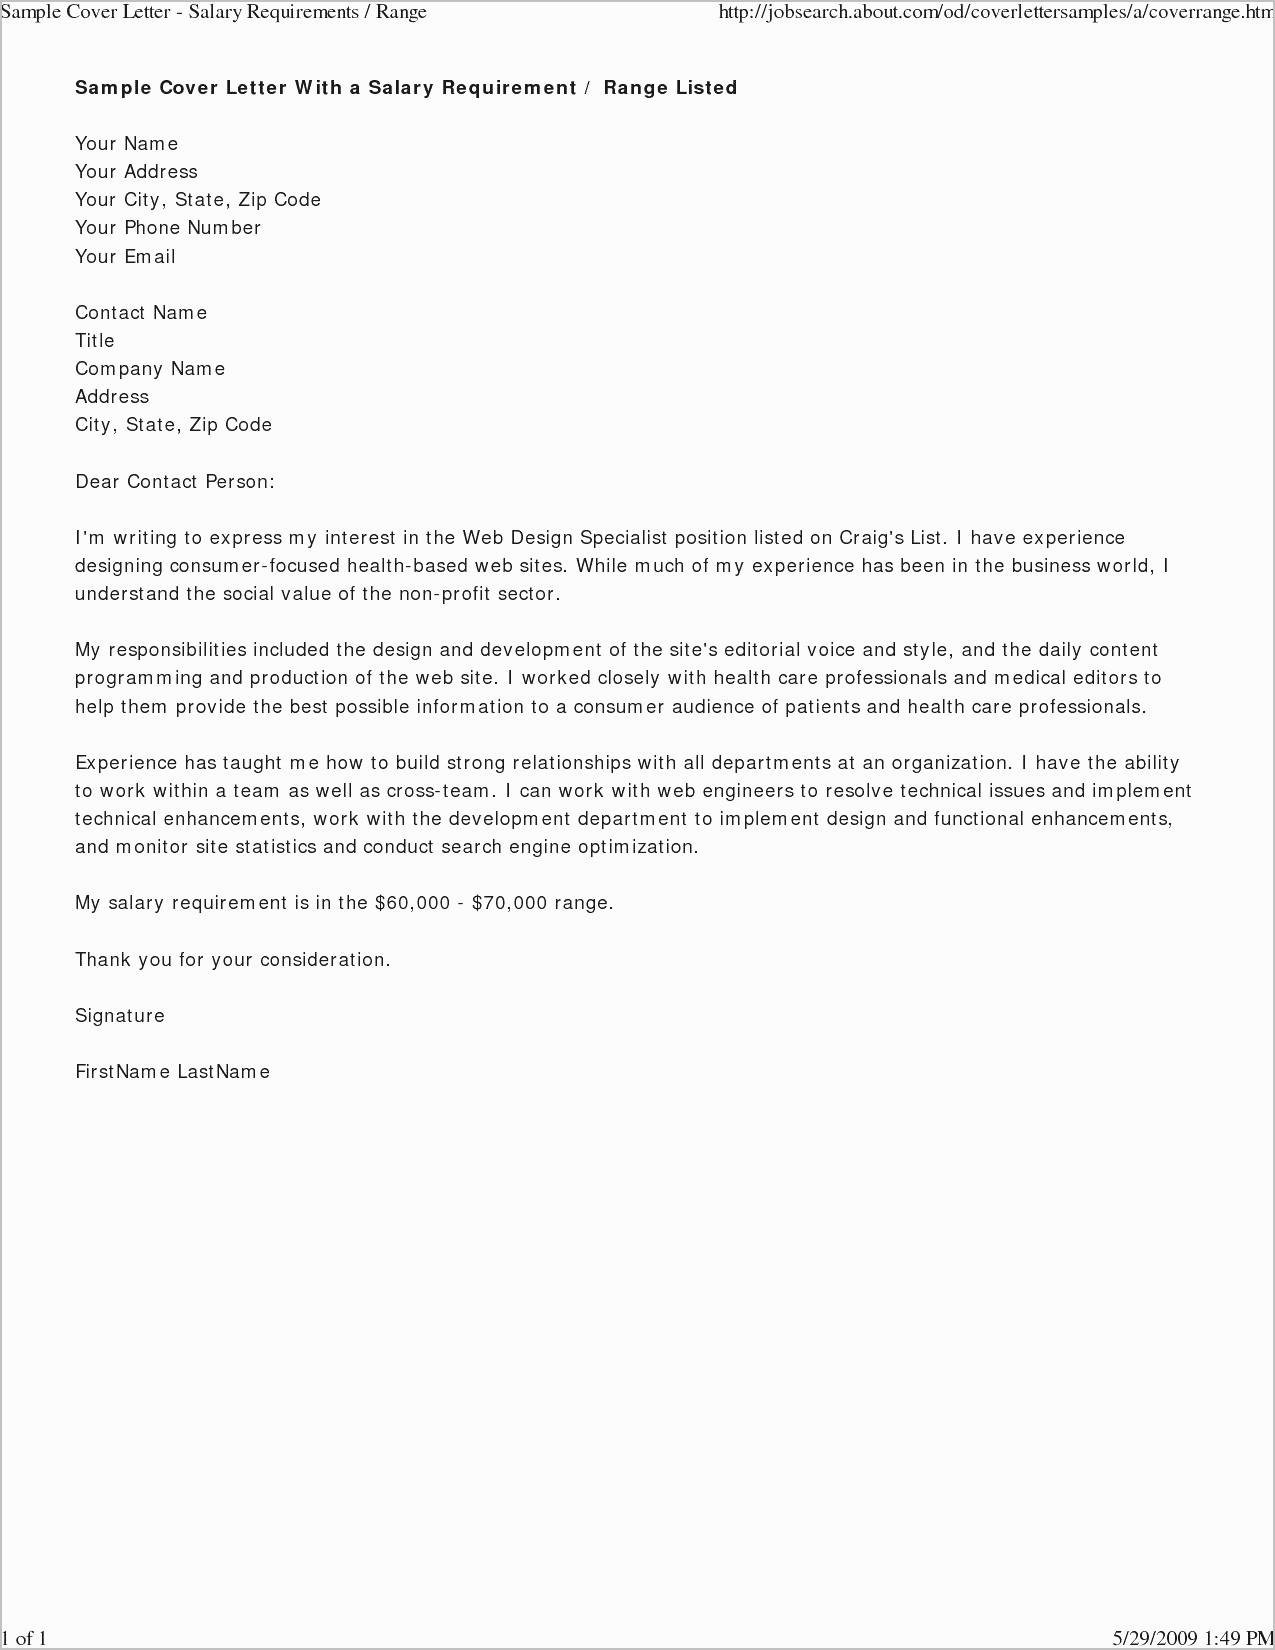 Example Cover Letter Software Engineer from mthomearts.com